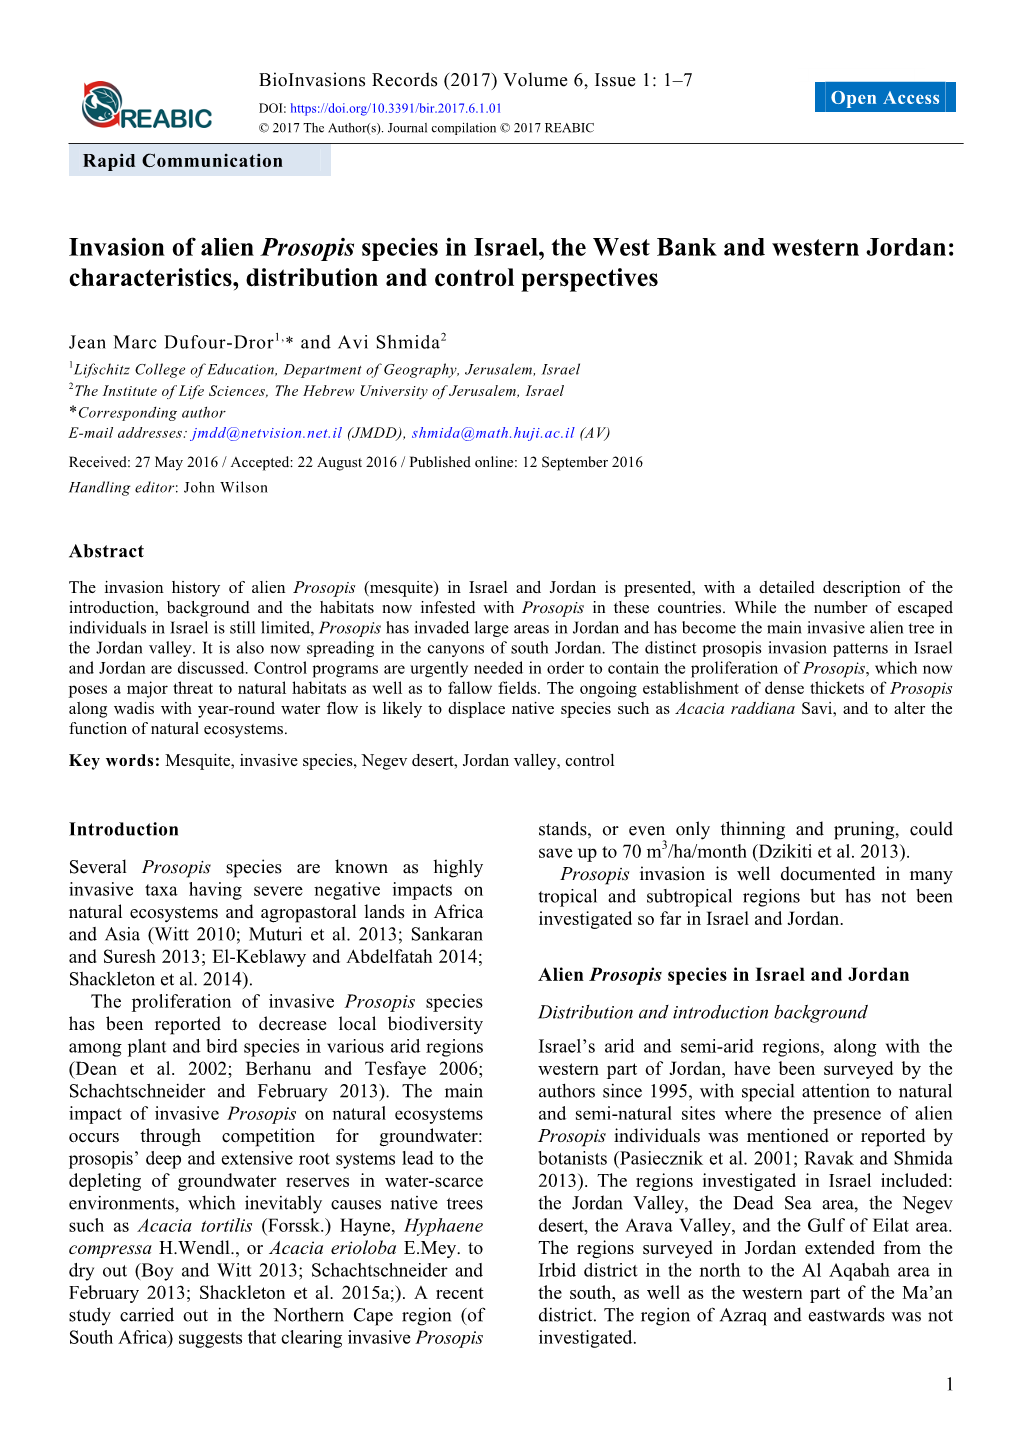 Invasion of Alien Prosopis Species in Israel, the West Bank and Western Jordan: Characteristics, Distribution and Control Perspectives